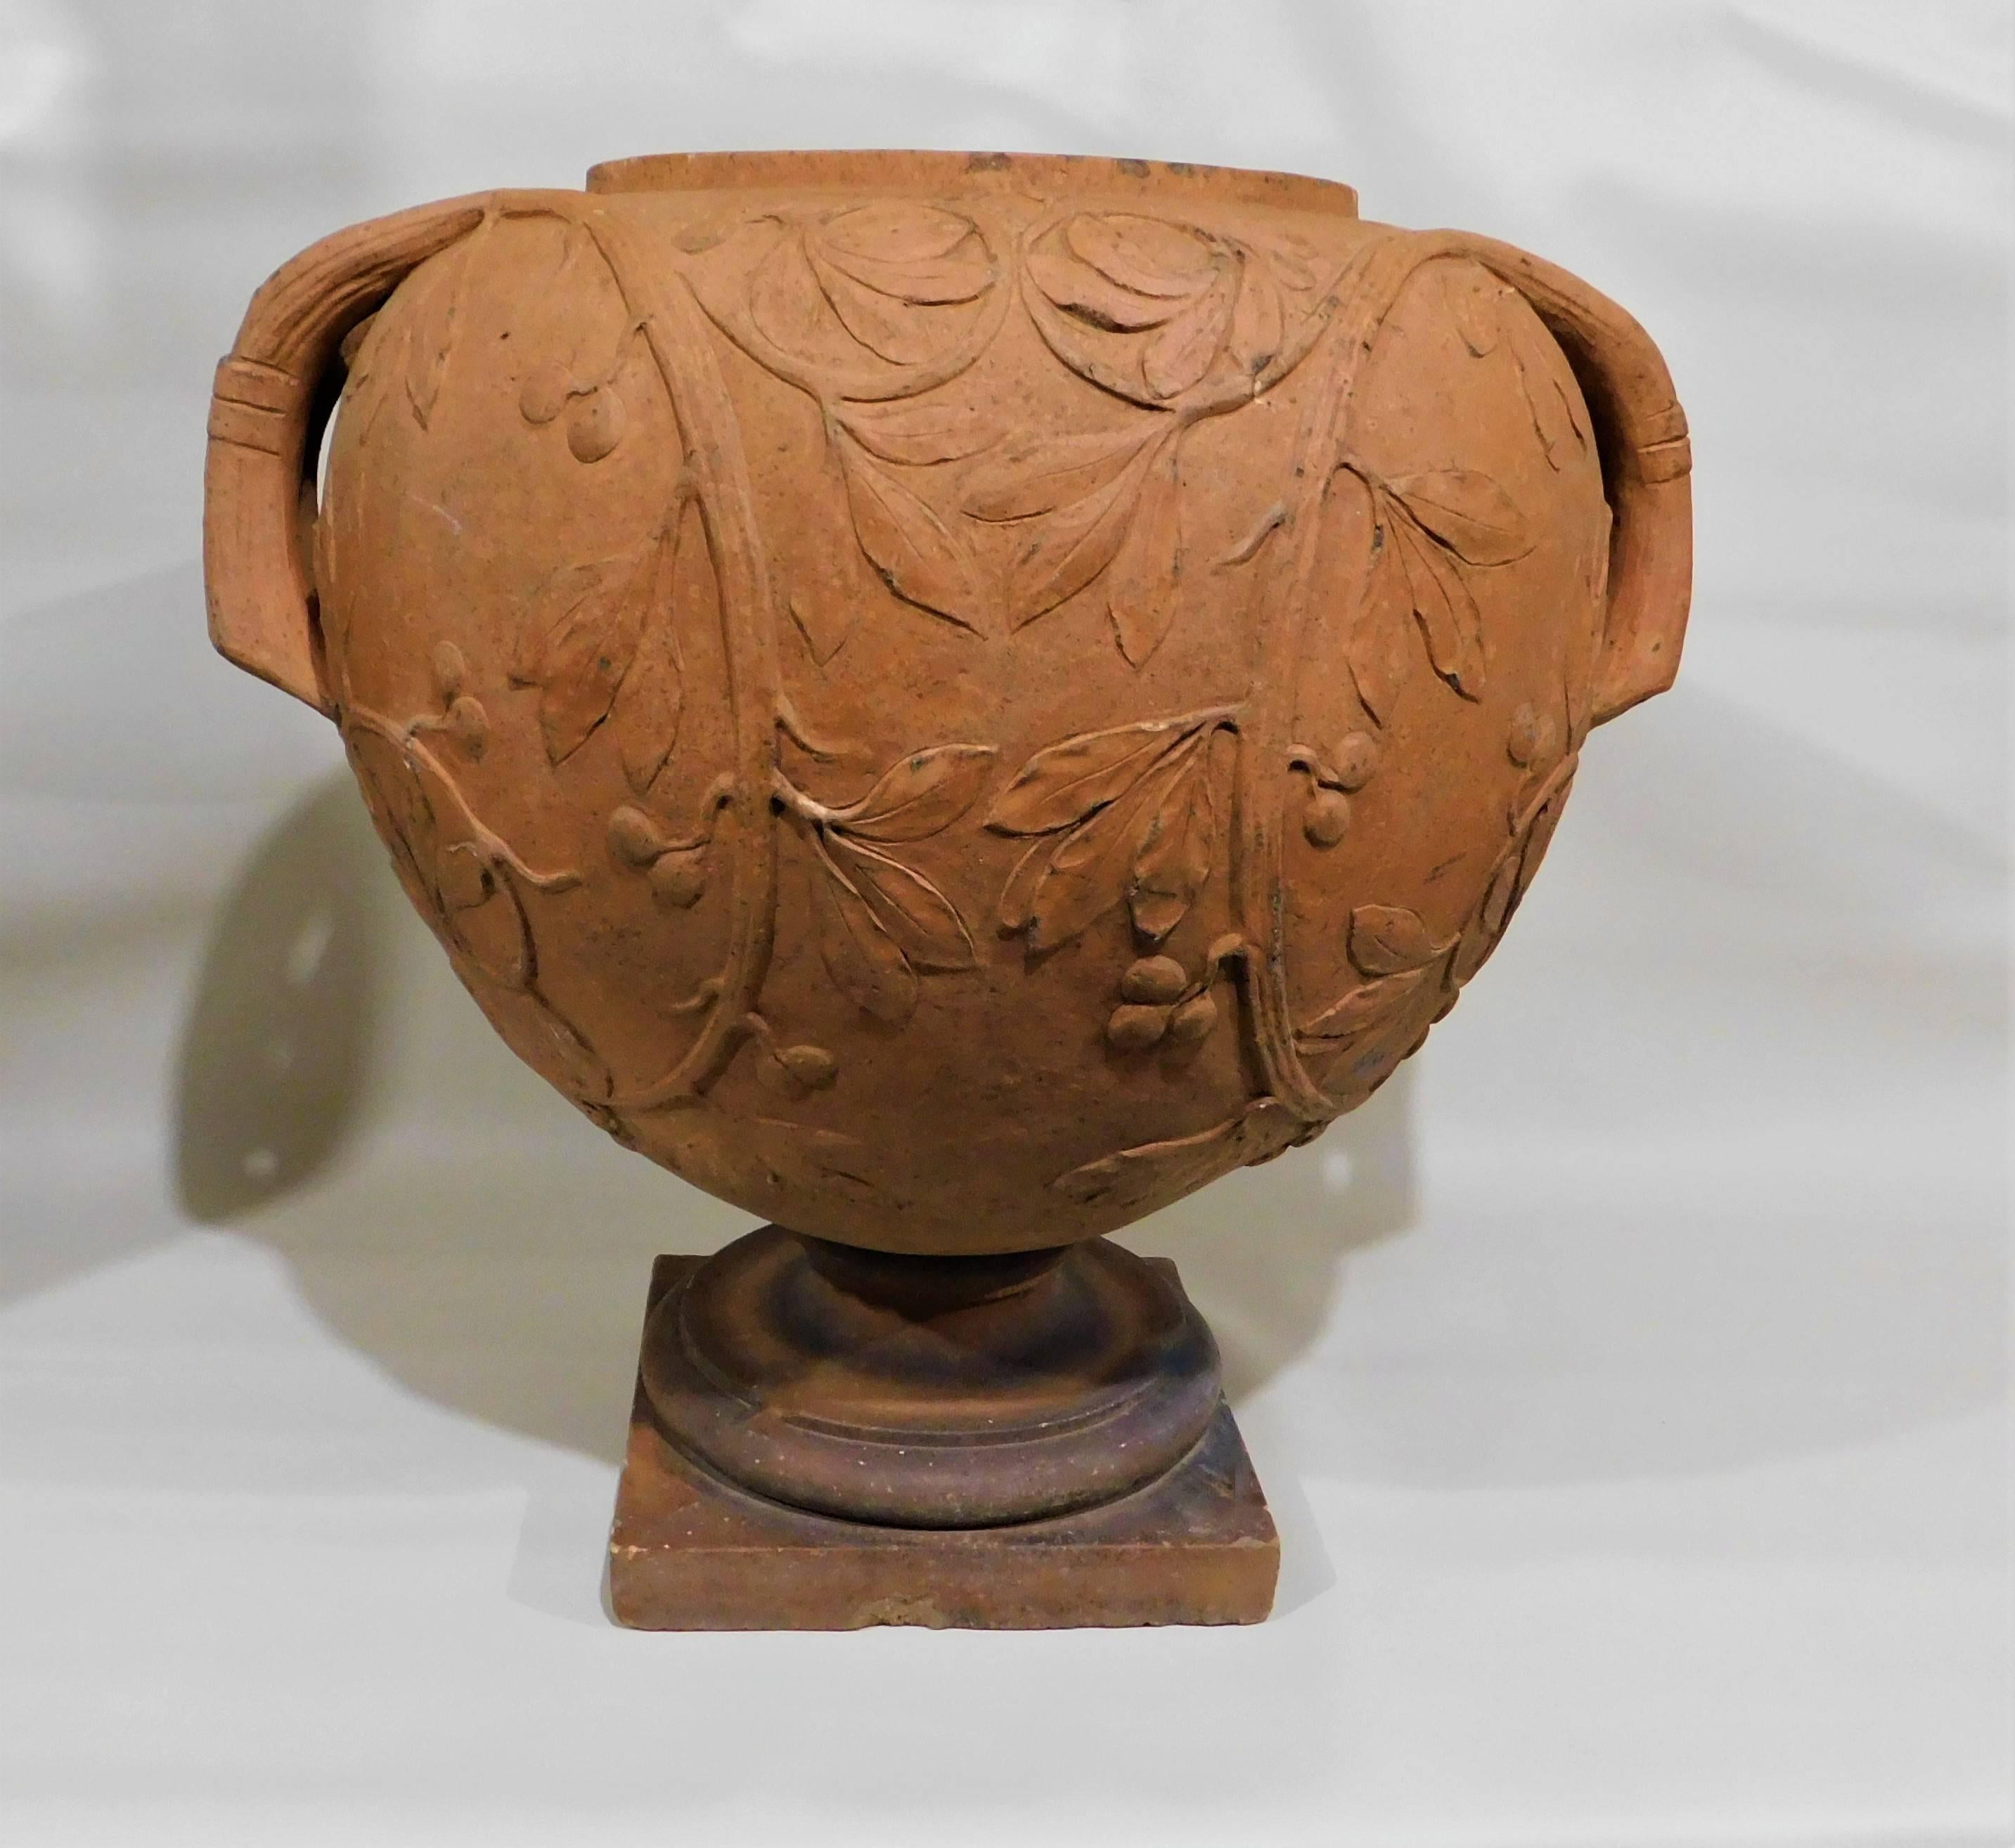 Italian terracotta urn/vase decorated with a grape vine design. Urn comes off the base.